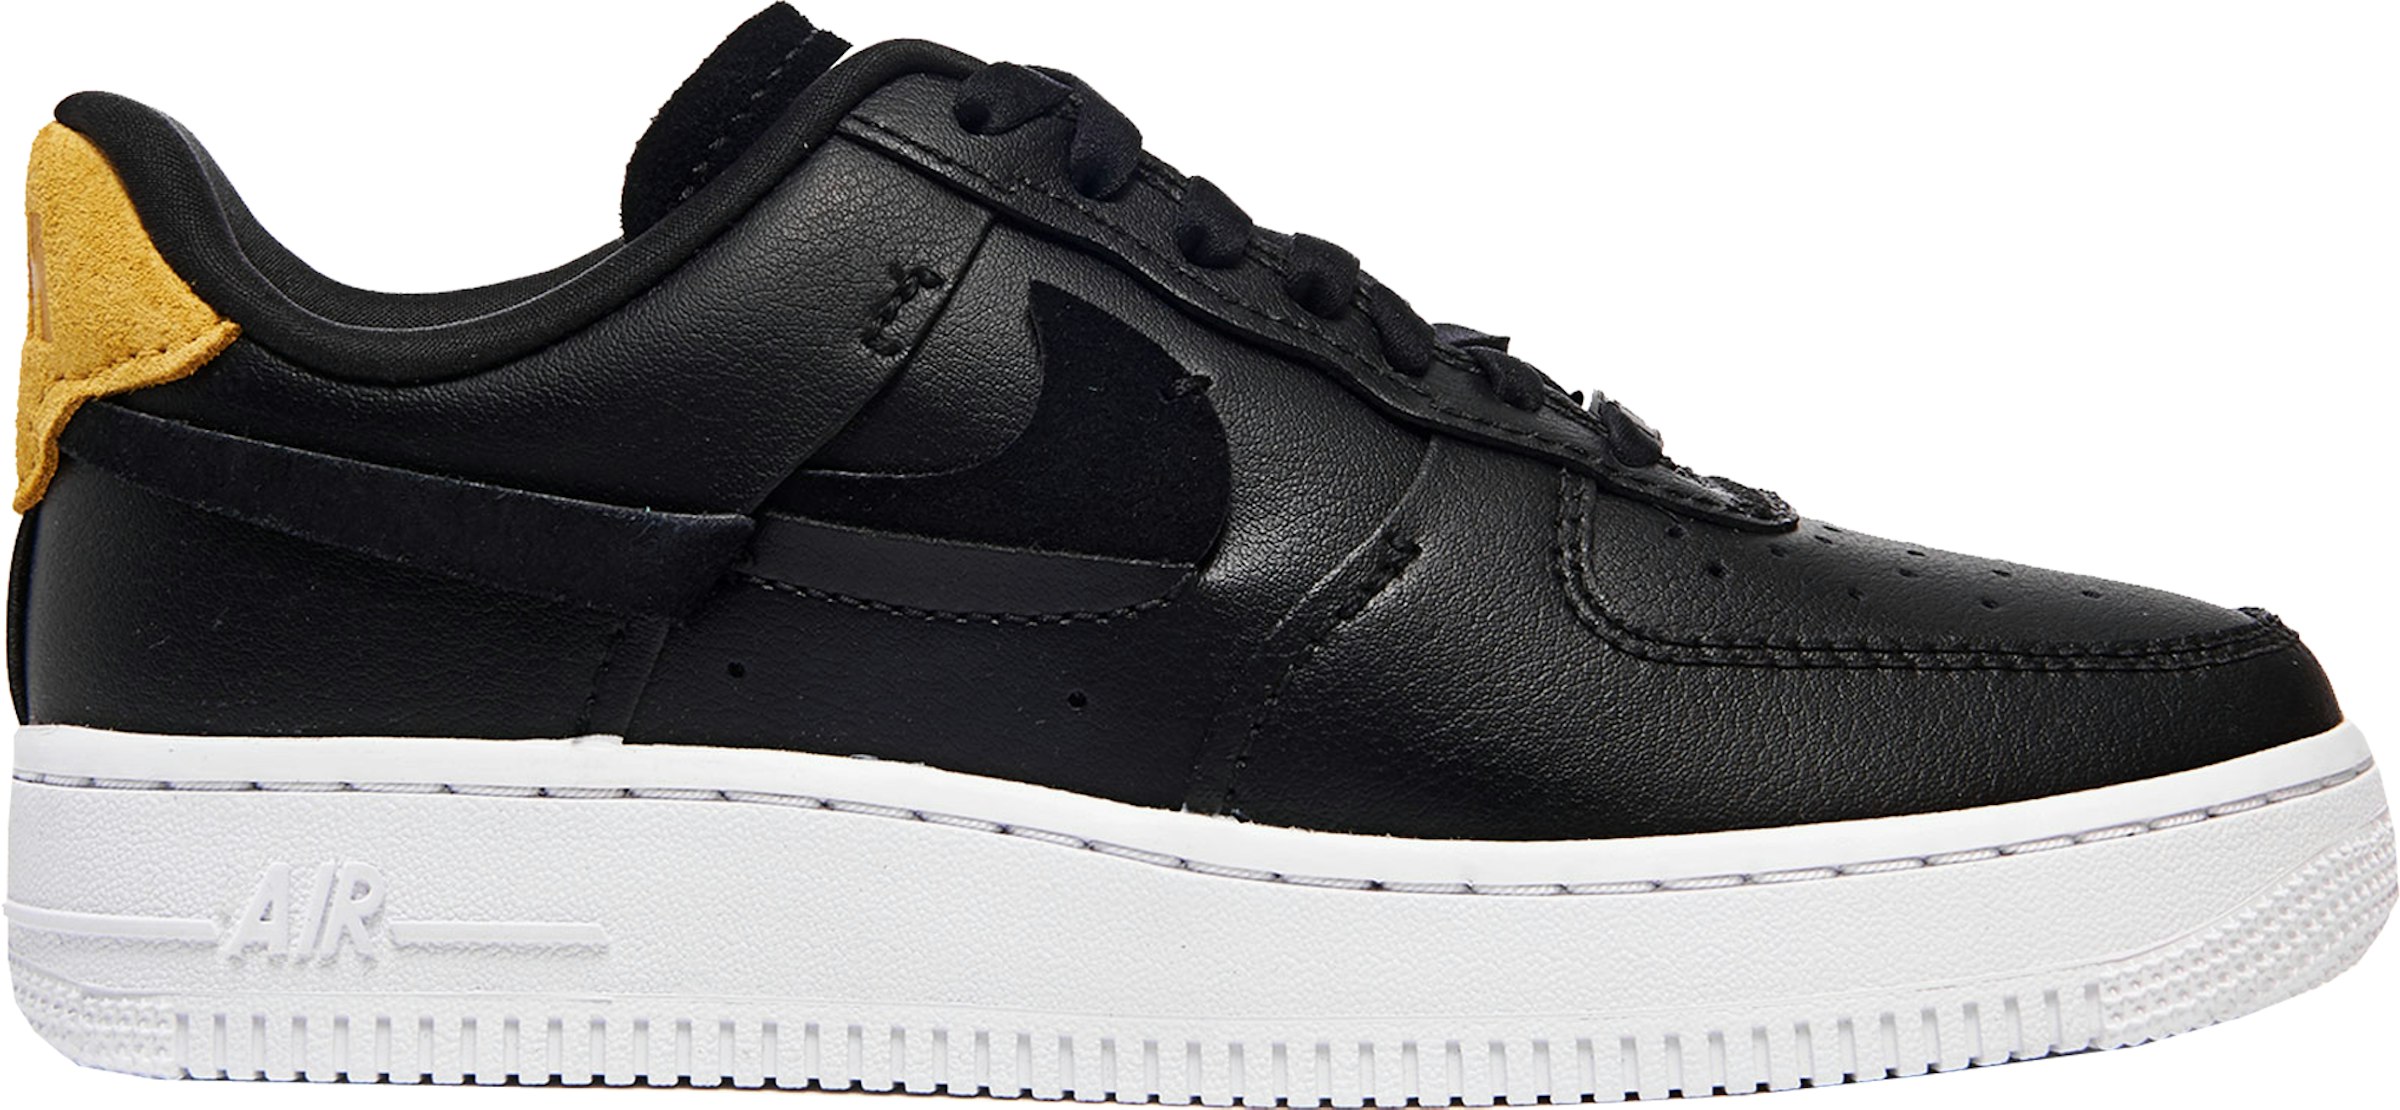 Nike Air Force 1 LX Inside Out Black - 898889-014 - US